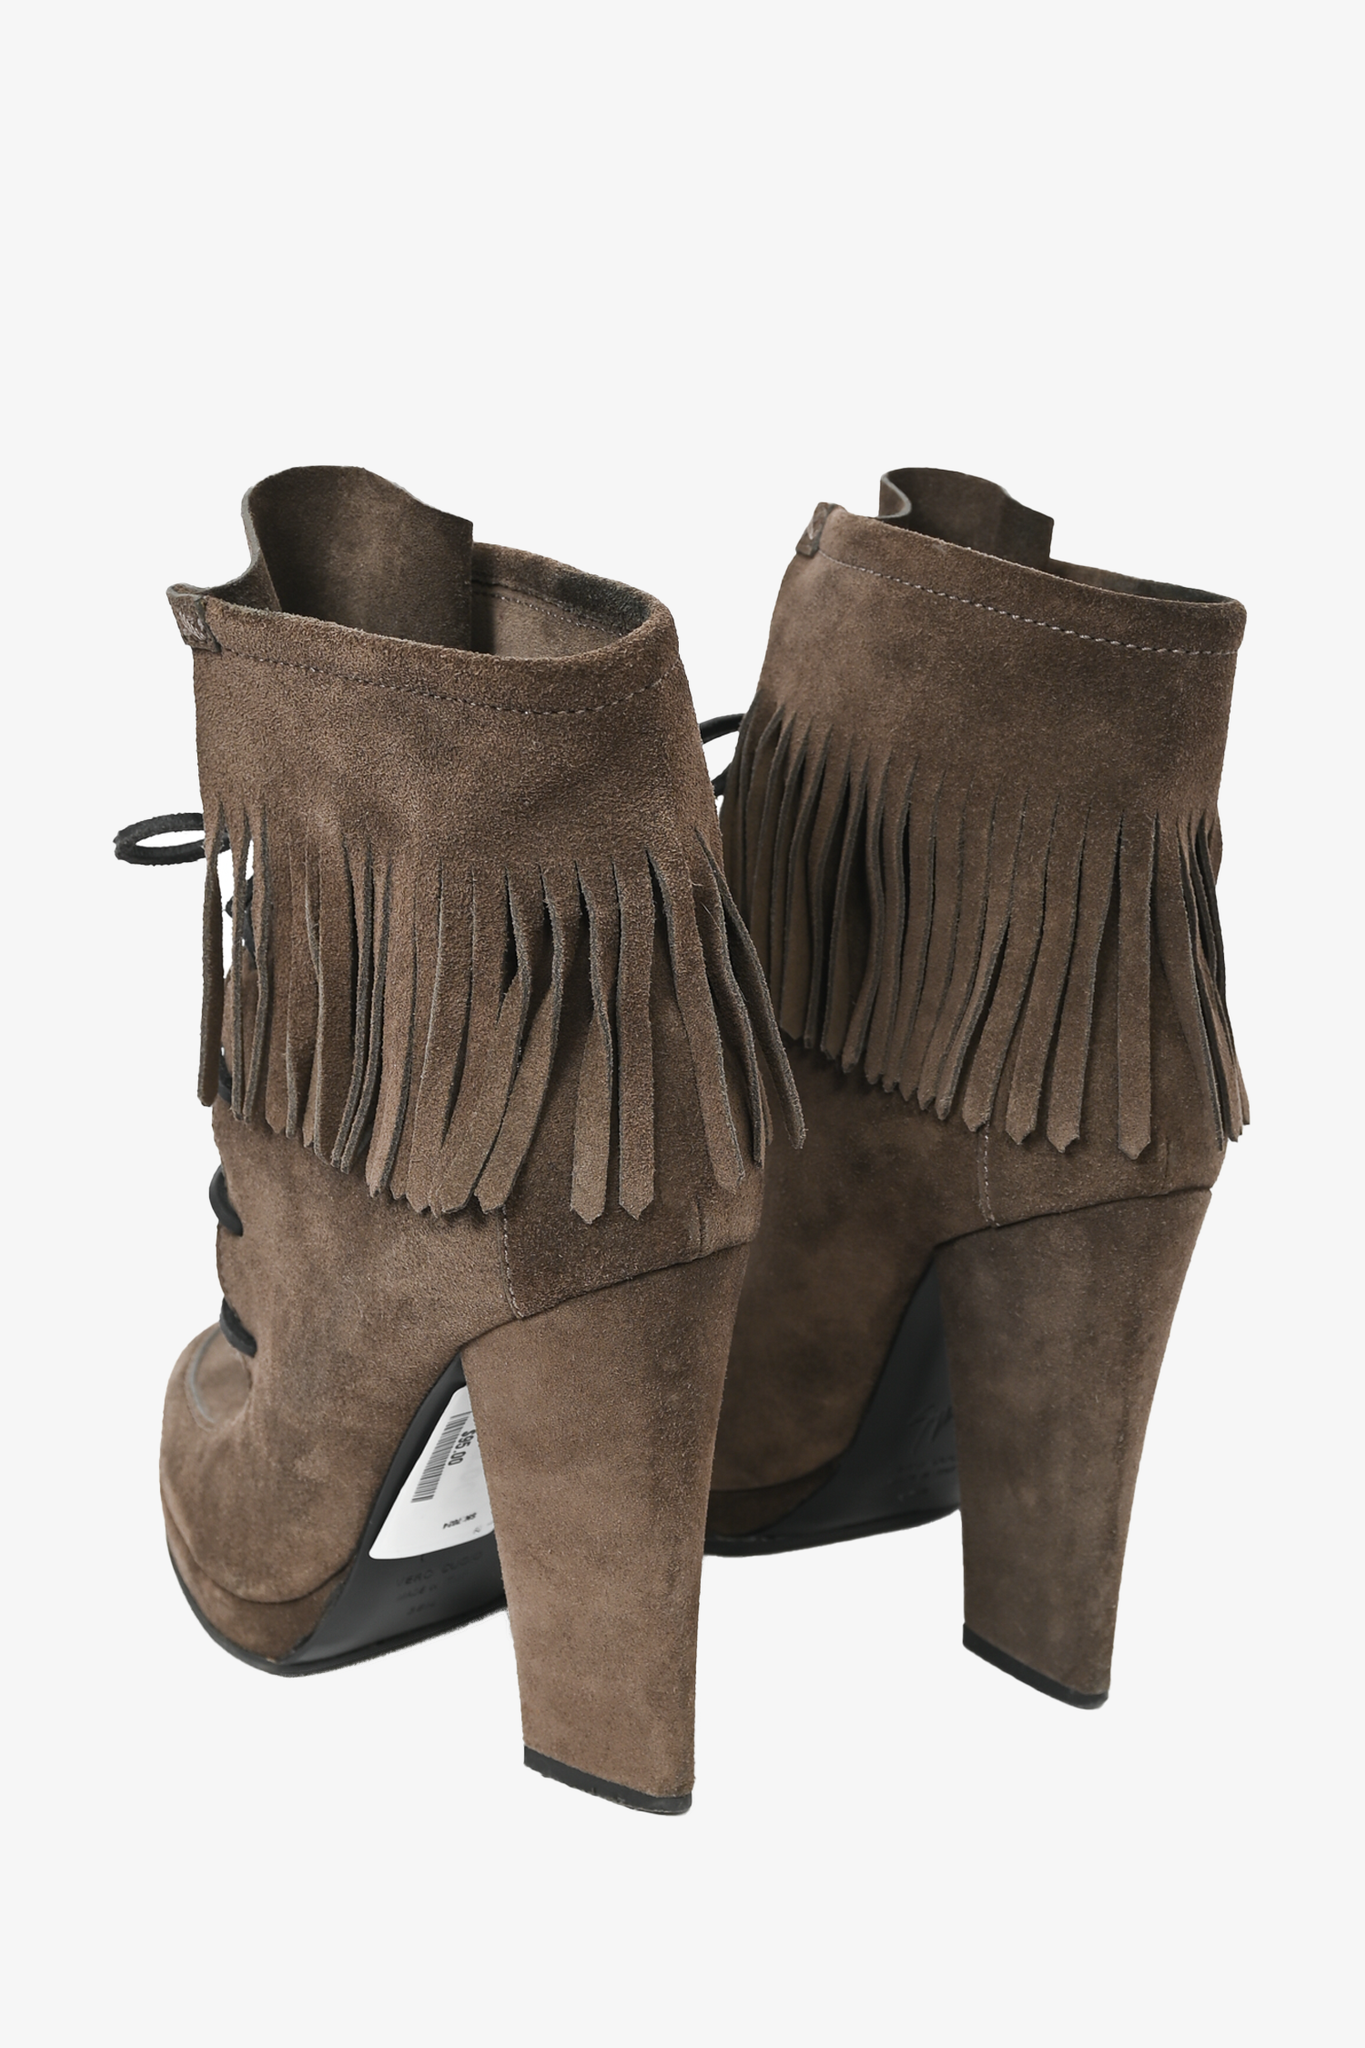 Giuseppe Zanotti Brown Suede Fringe Lace-Up Heeled Boots Size 38.5